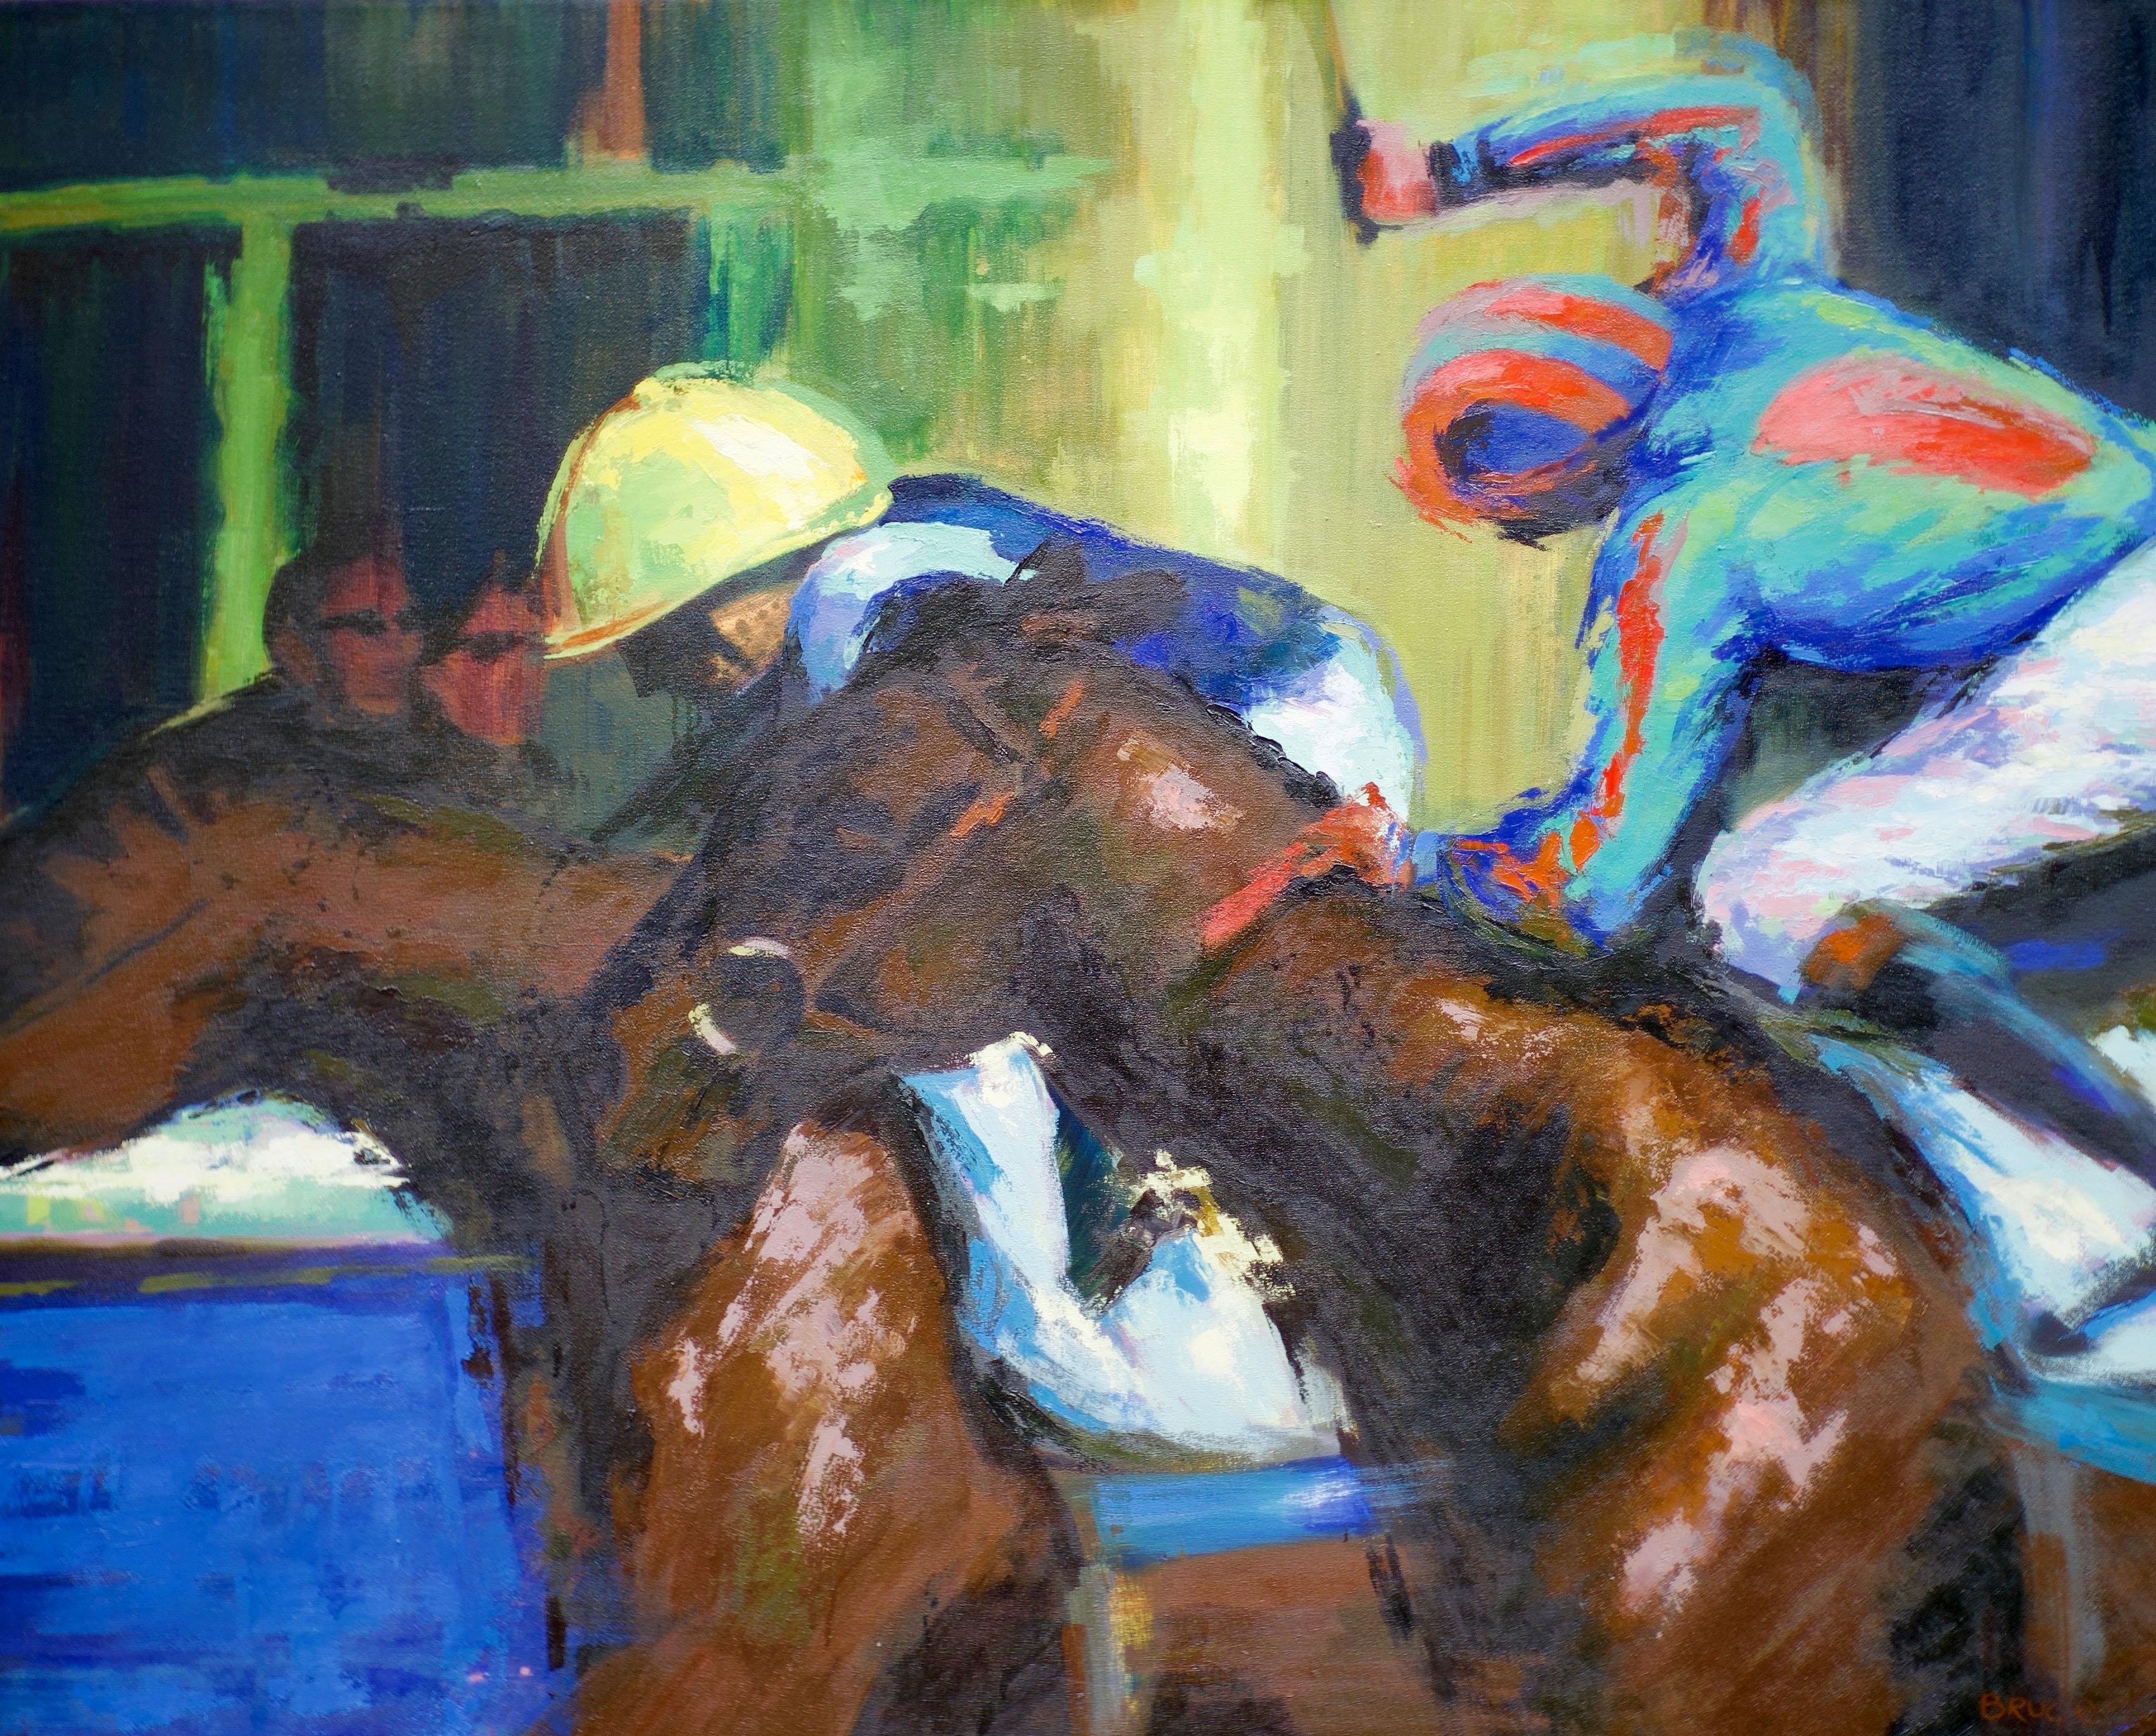 Chris Bruce Animal Painting - In the Final Strides - Equestrian, Racing, Realist, Contemporary